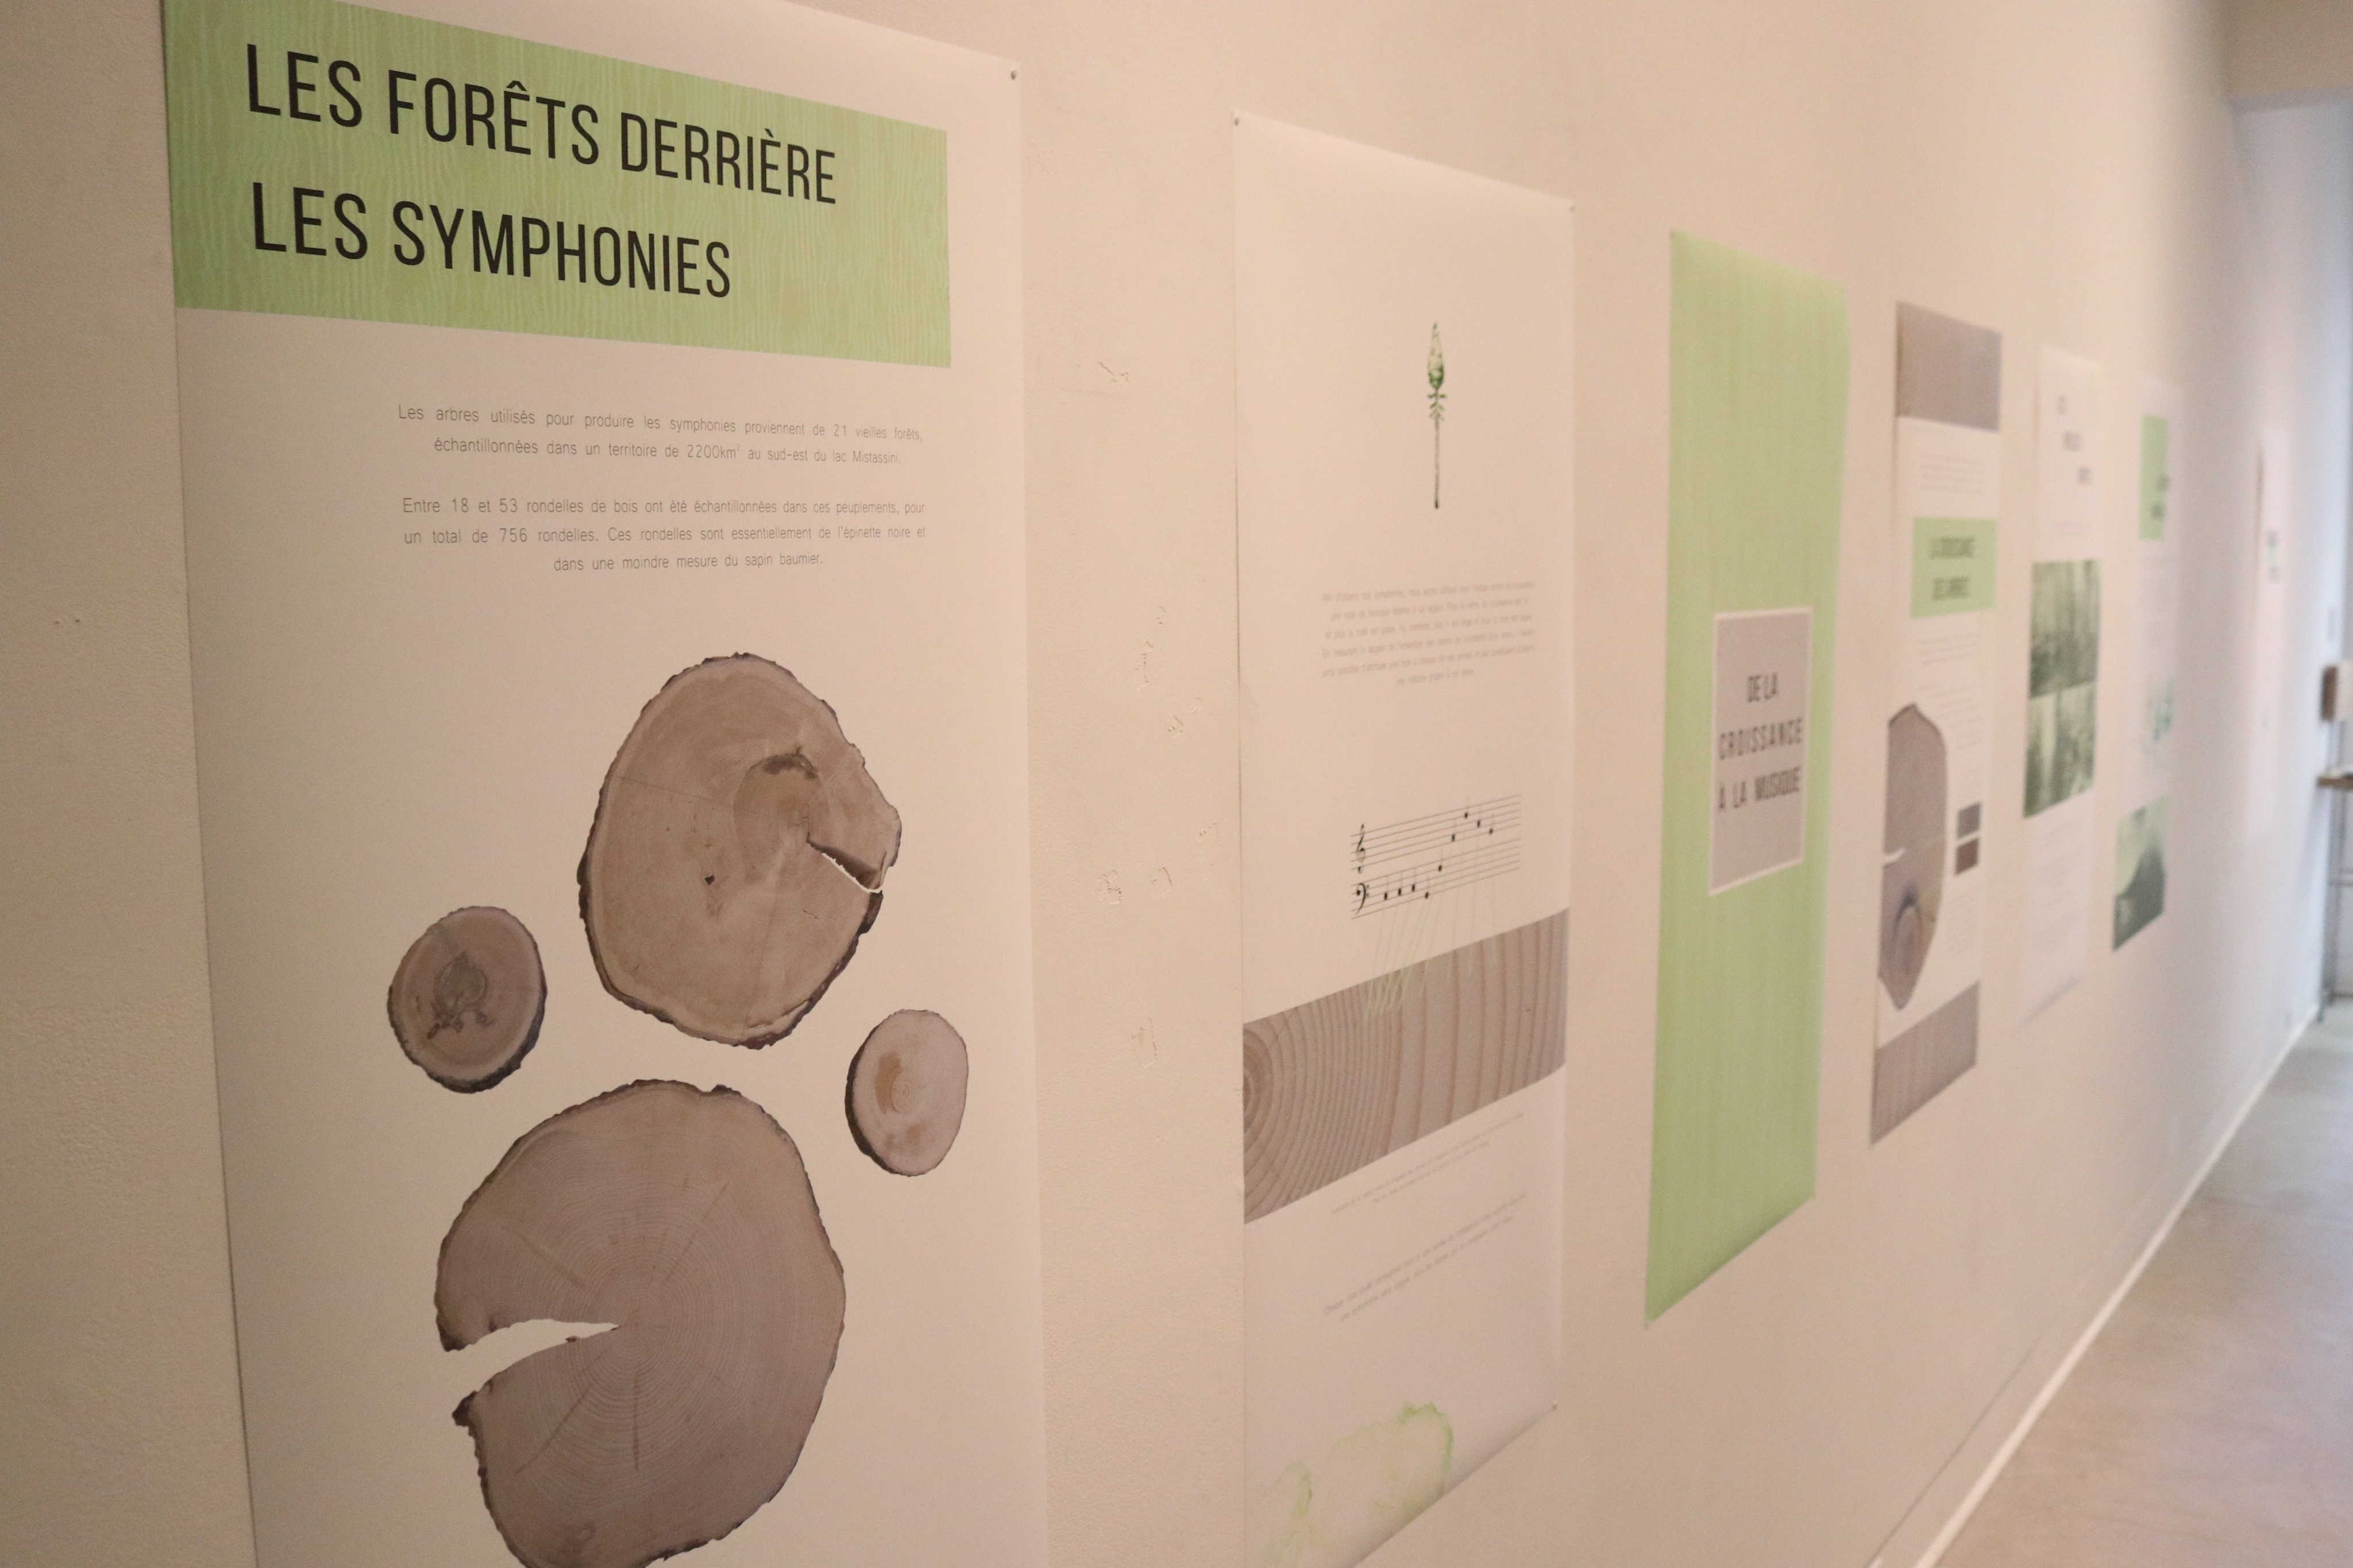 Introductory posters for the traveling exhibition